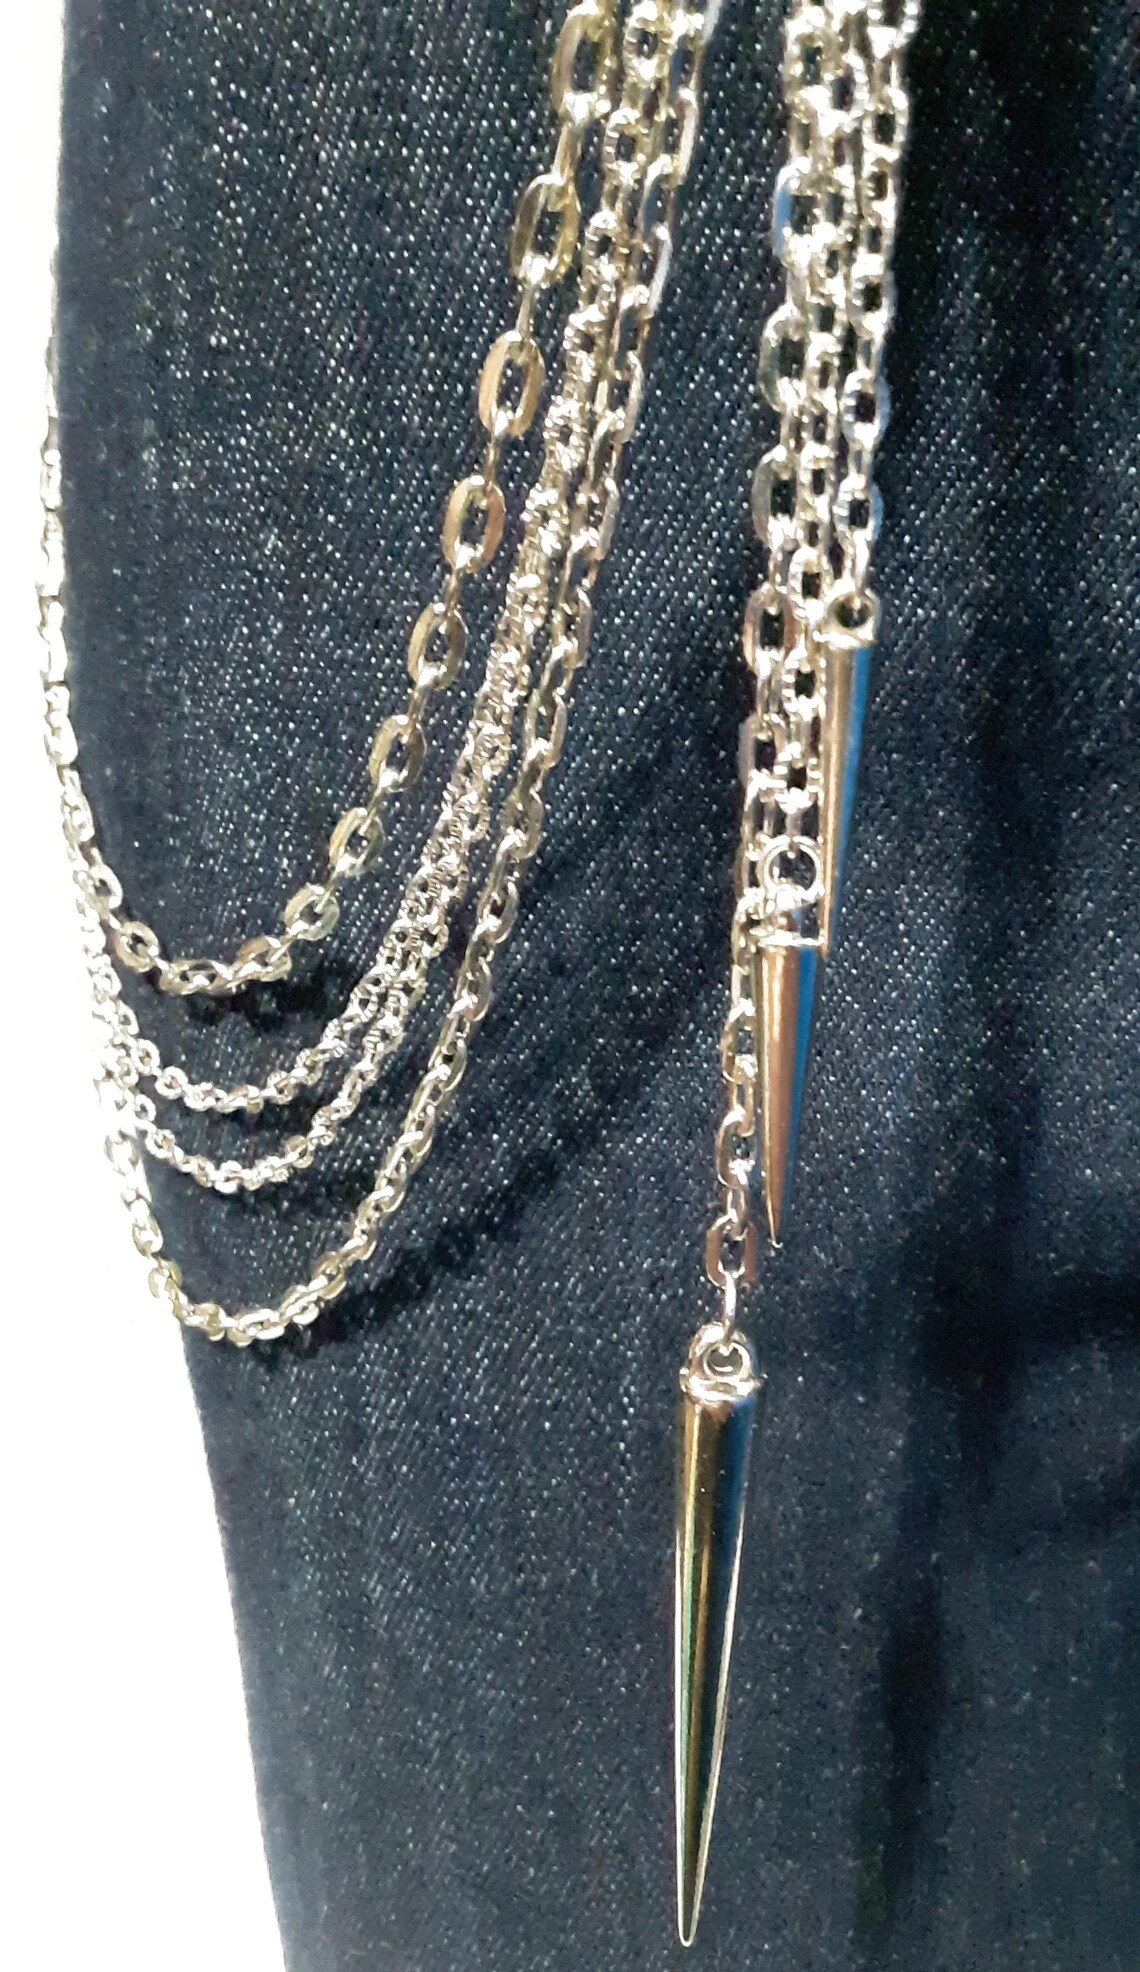 4 Strand Spiked Belt Loop Pants Chain Available in 4 Colors